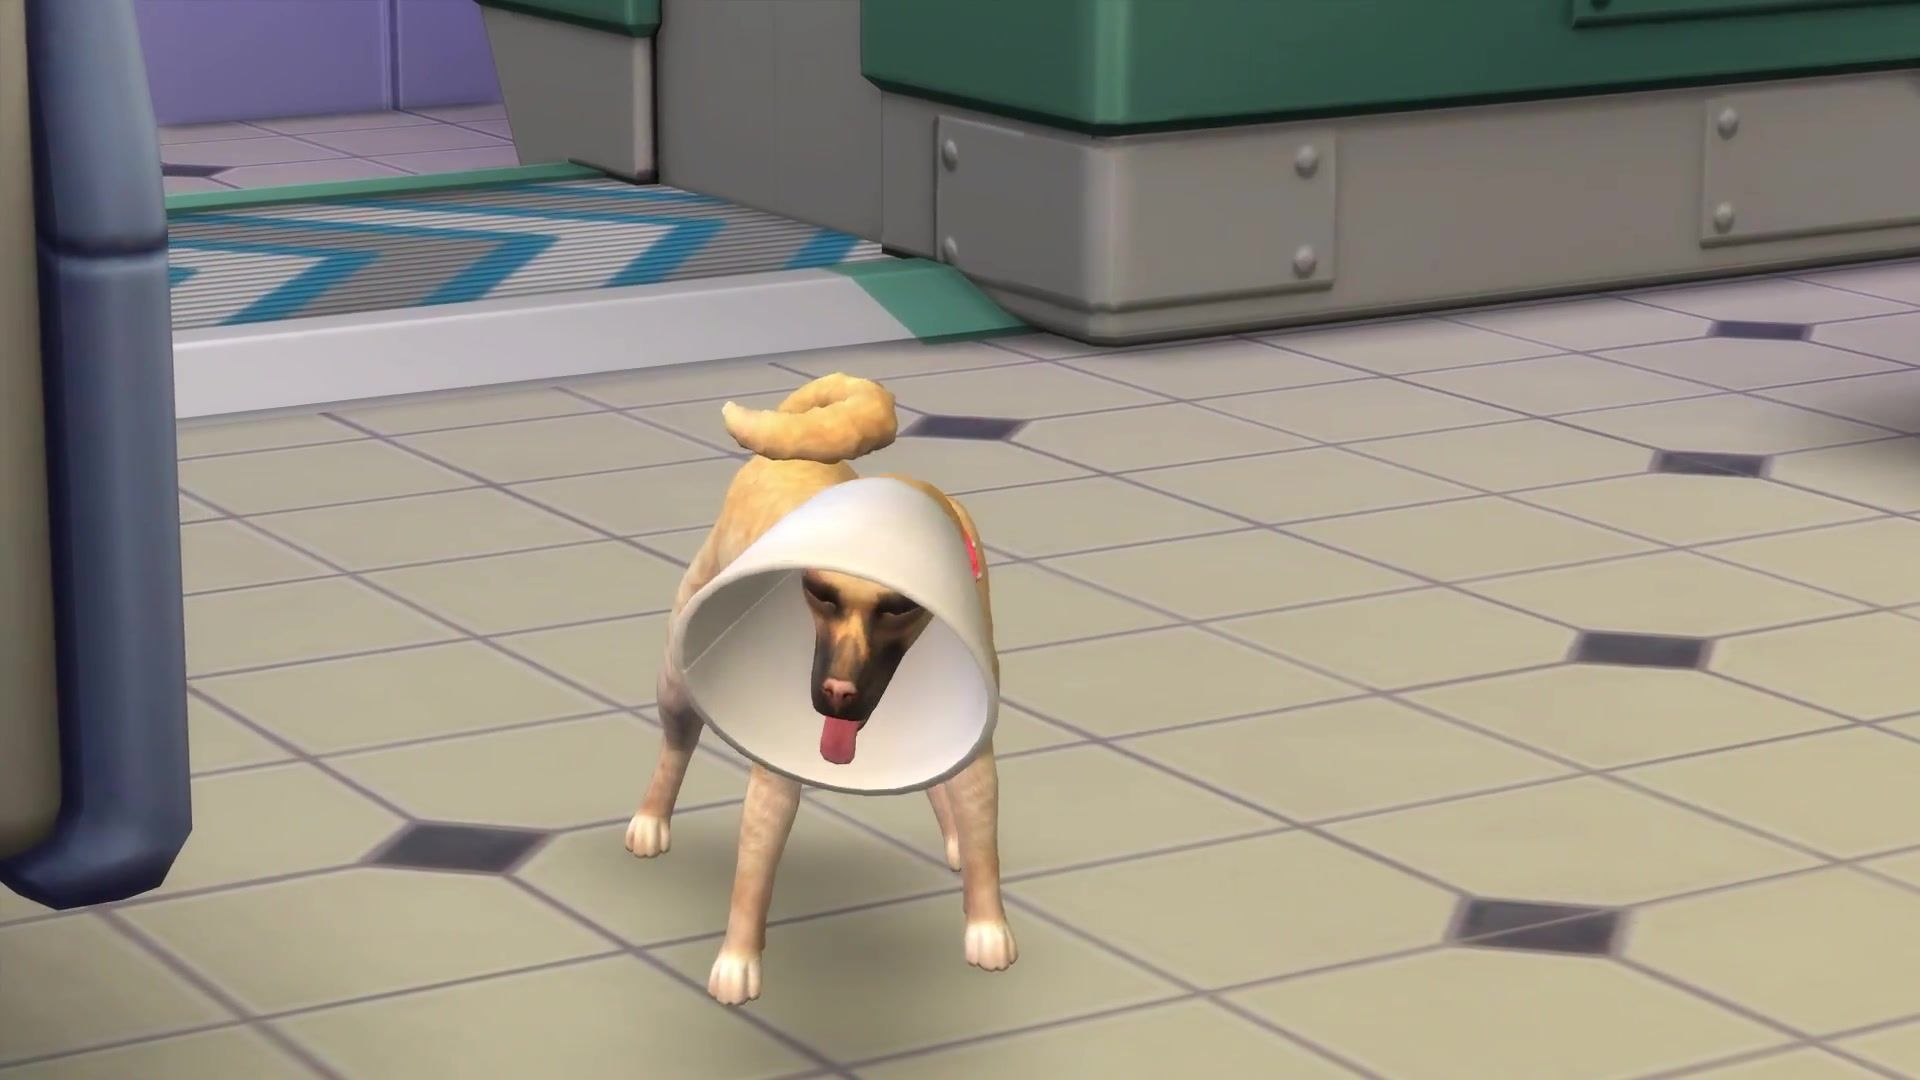 Dogs will probably hate this in the Sims just as much as they do in real life.